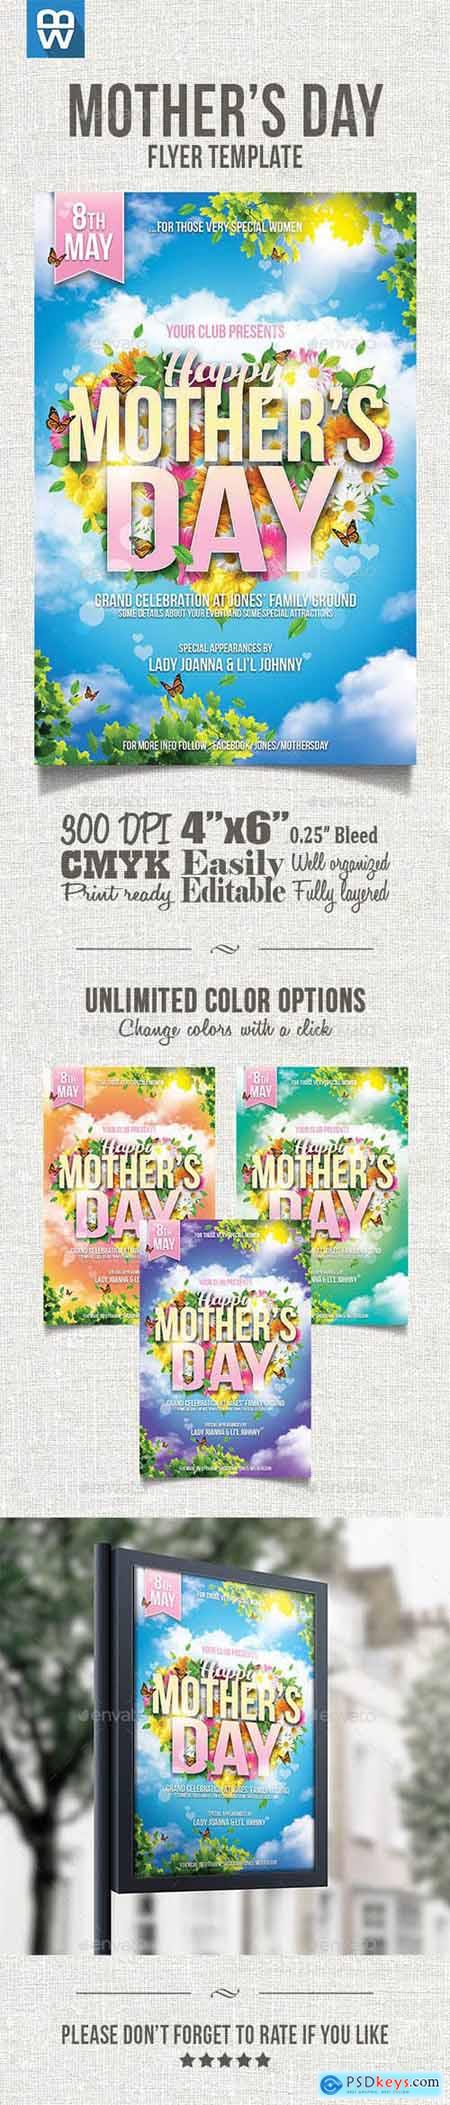 Graphicriver Mother's Day Flyer Template